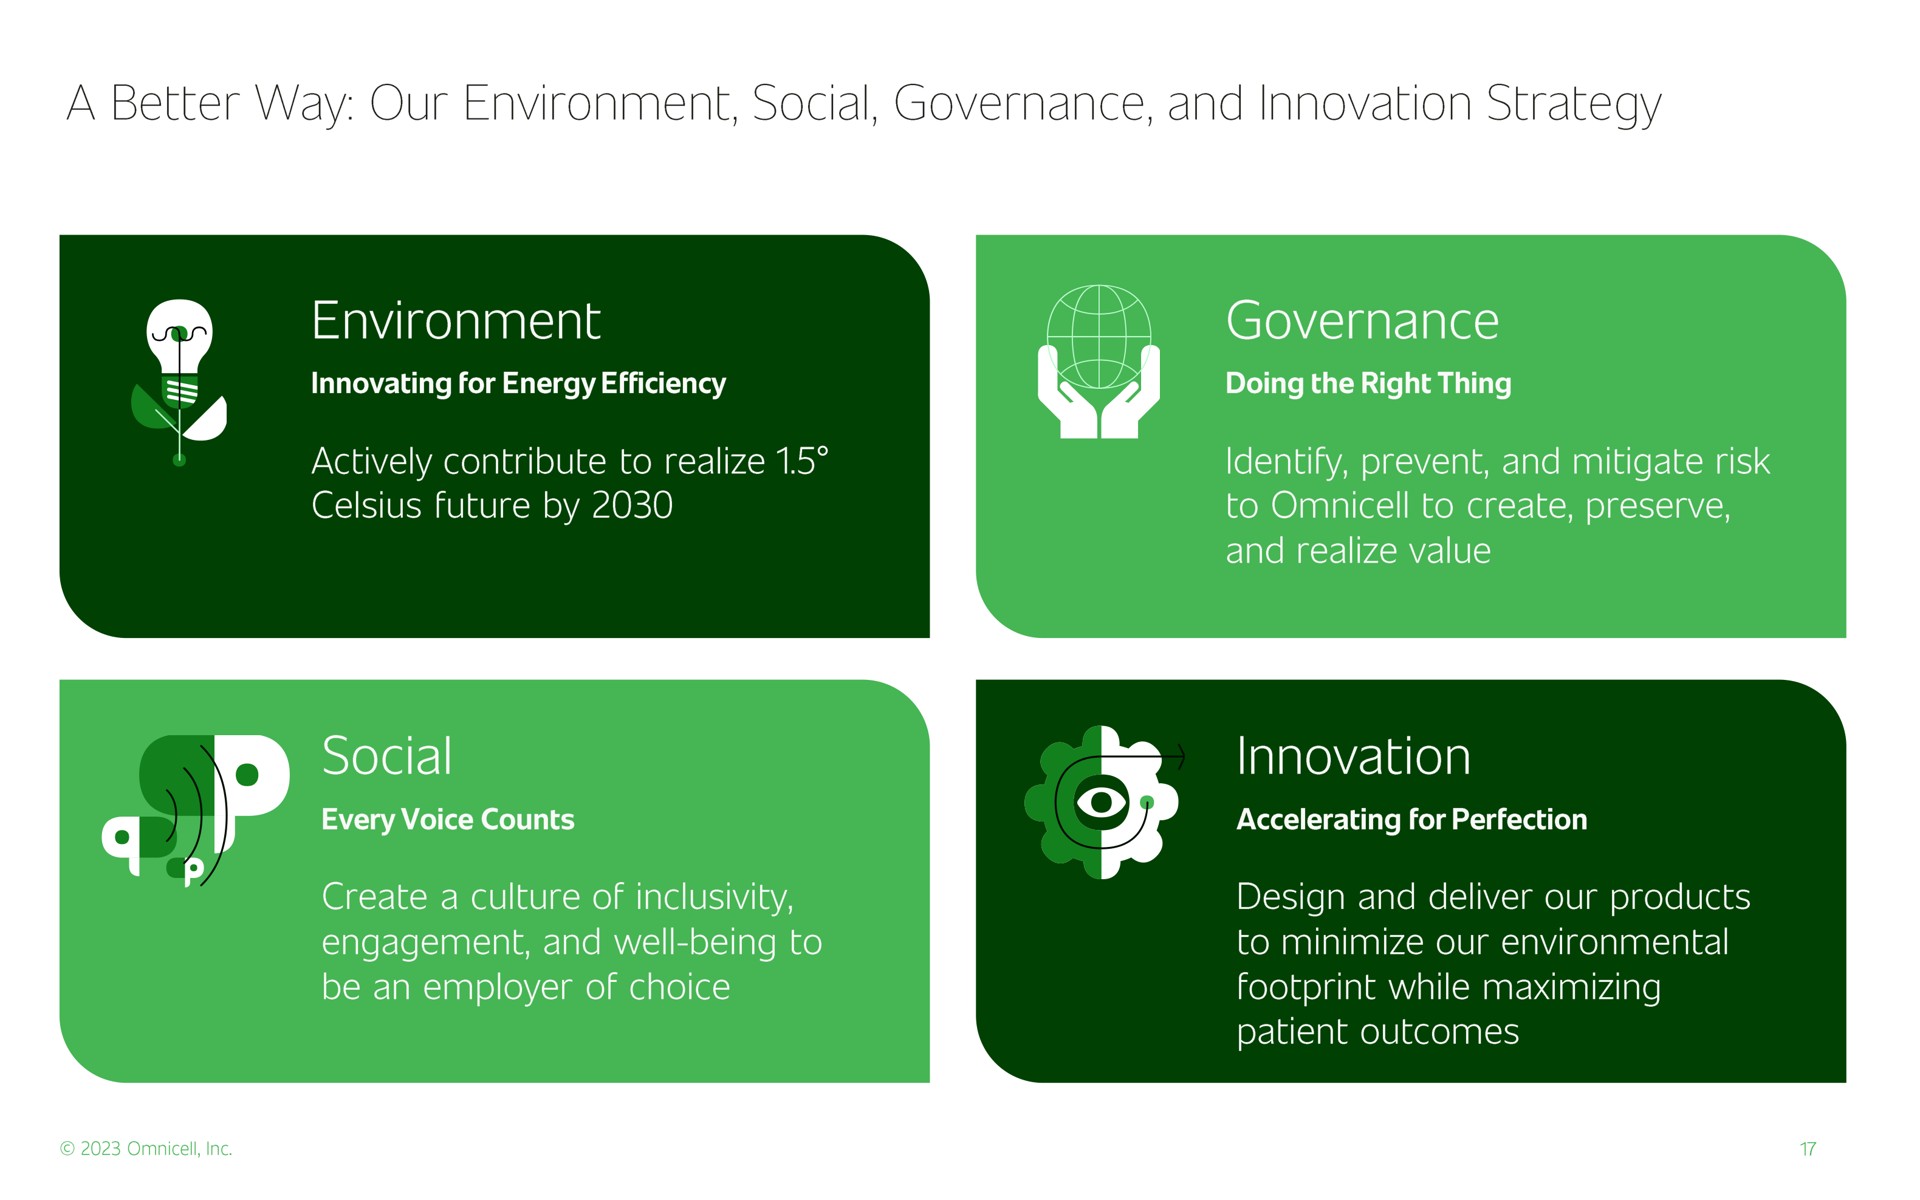 a better way our environment social governance and innovation strategy environment actively contribute to realize future by governance identify prevent and mitigate risk to to create preserve and realize value patient outcomes design and deliver our products to minimize our environmental footprint while maximizing it engagement and well being to be an employer of choice innovation alee | Omnicell